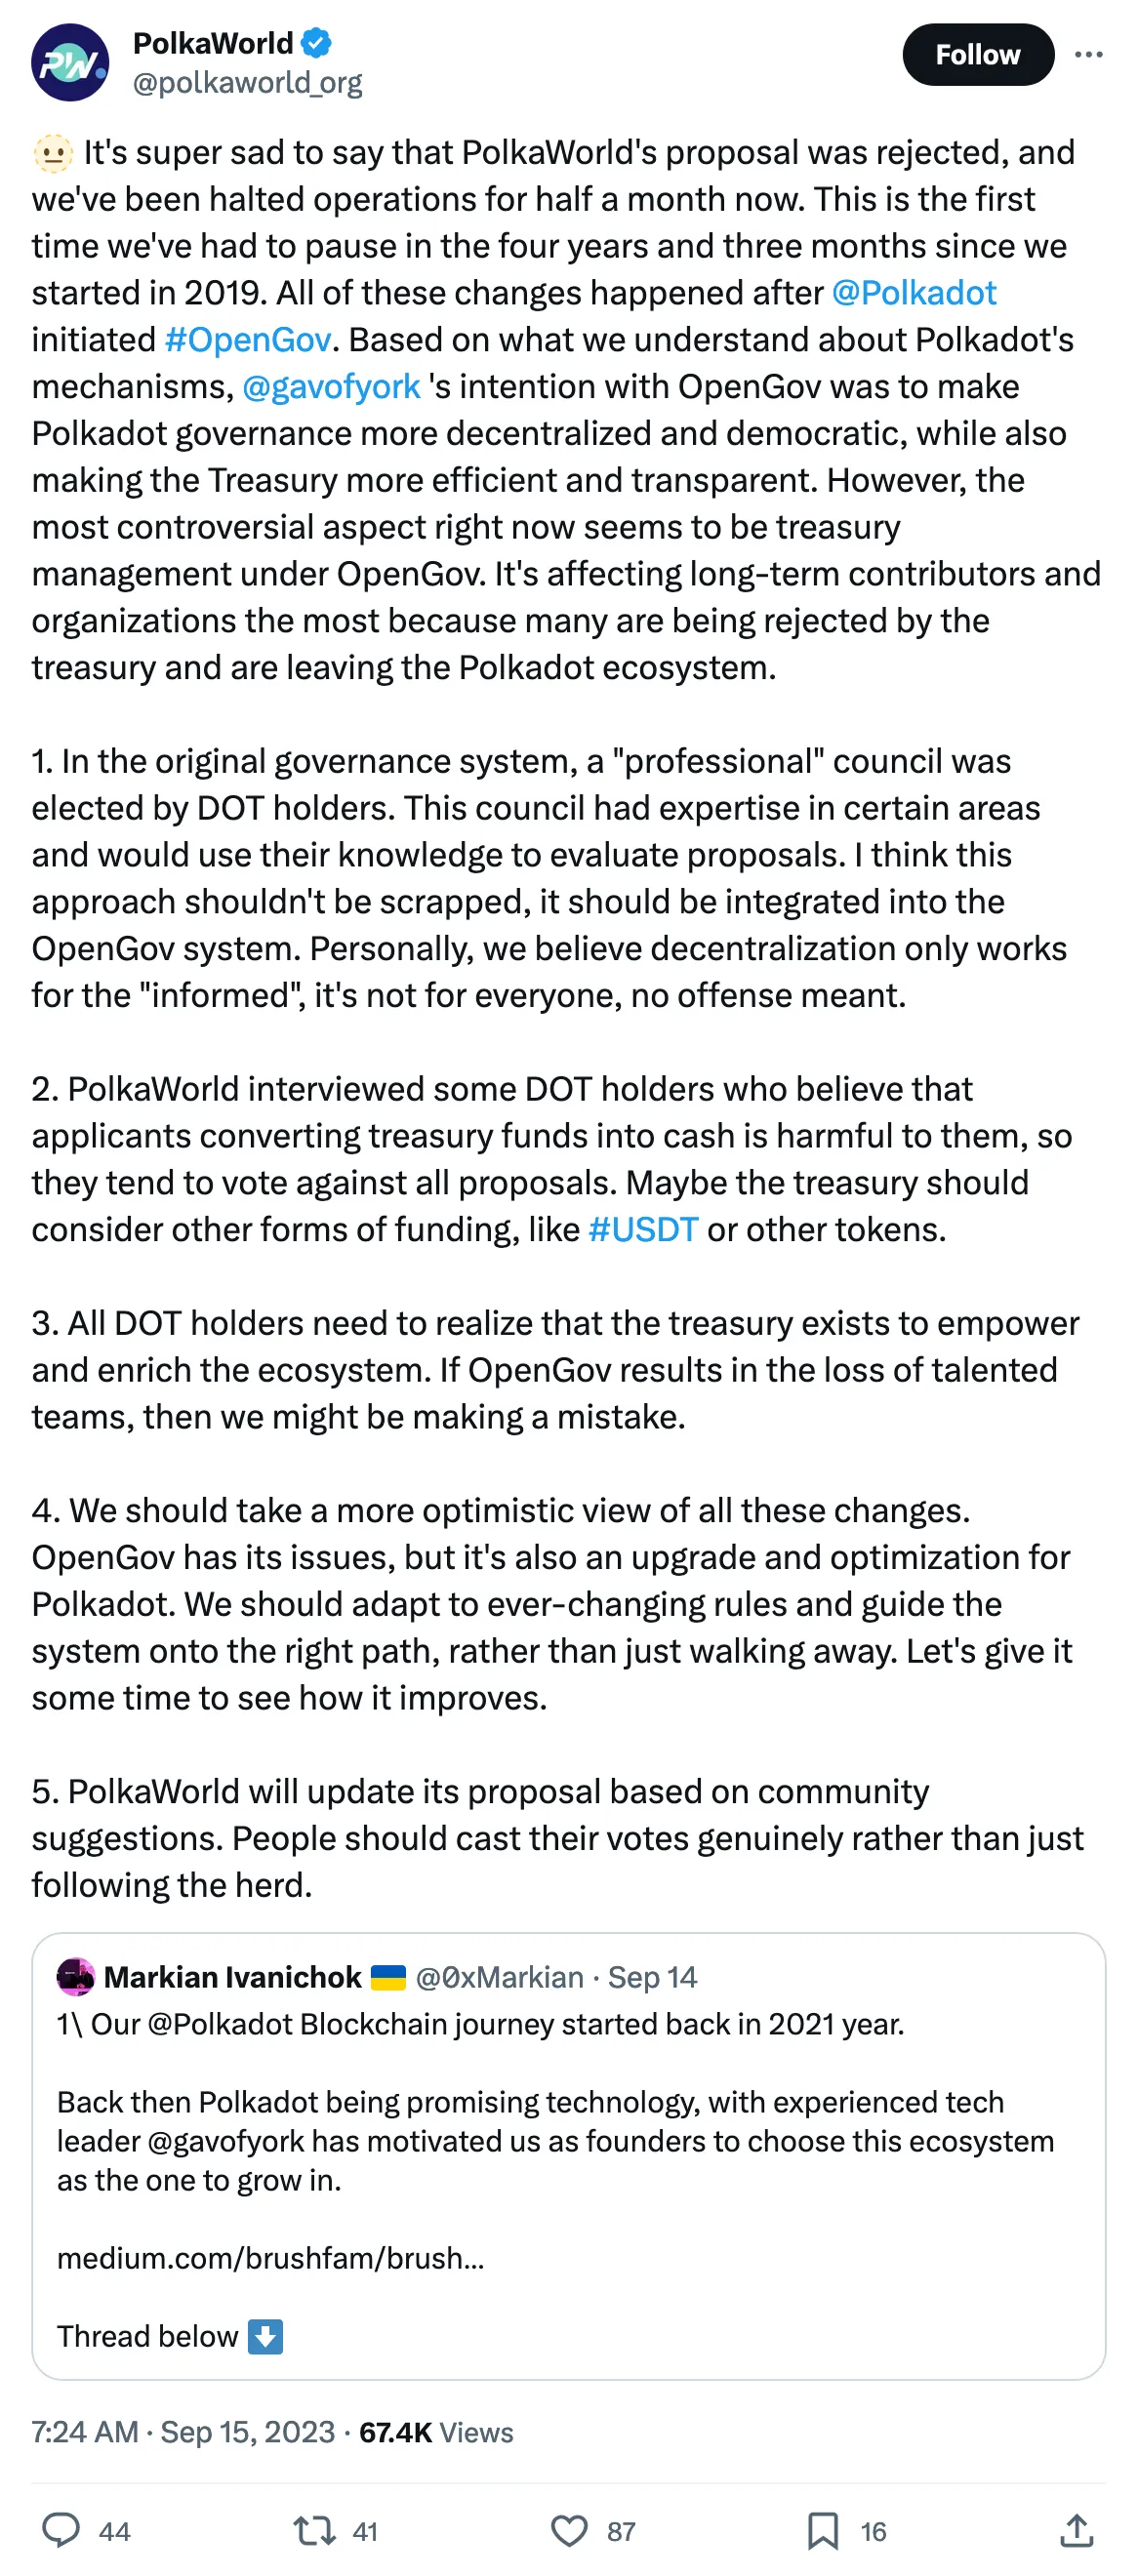  It's super sad to say that PolkaWorld's proposal was rejected, and we've been halted operations for half a month now. This is the first time we've had to pause in the four years and three months since we started in 2019. All of these changes happened after 
@Polkadot
  initiated #OpenGov. Based on what we understand about Polkadot's mechanisms, 
@gavofyork
 's intention with OpenGov was to make Polkadot governance more decentralized and democratic, while also making the Treasury more efficient and transparent. However, the most controversial aspect right now seems to be treasury management under OpenGov. It's affecting long-term contributors and organizations the most because many are being rejected by the treasury and are leaving the Polkadot ecosystem.

1. In the original governance system, a "professional" council was elected by DOT holders. This council had expertise in certain areas and would use their knowledge to evaluate proposals. I think this approach shouldn't be scrapped, it should be integrated into the OpenGov system. Personally, we believe decentralization only works for the "informed", it's not for everyone, no offense meant.

2. PolkaWorld interviewed some DOT holders who believe that applicants converting treasury funds into cash is harmful to them, so they tend to vote against all proposals. Maybe the treasury should consider other forms of funding, like #USDT or other tokens.

3. All DOT holders need to realize that the treasury exists to empower and enrich the ecosystem. If OpenGov results in the loss of talented teams, then we might be making a mistake.

4. We should take a more optimistic view of all these changes. OpenGov has its issues, but it's also an upgrade and optimization for Polkadot. We should adapt to ever-changing rules and guide the system onto the right path, rather than just walking away. Let's give it some time to see how it improves.

5. PolkaWorld will update its proposal based on community suggestions. People should cast their votes genuinely rather than just following the herd. 
Tweeted at Sep 14